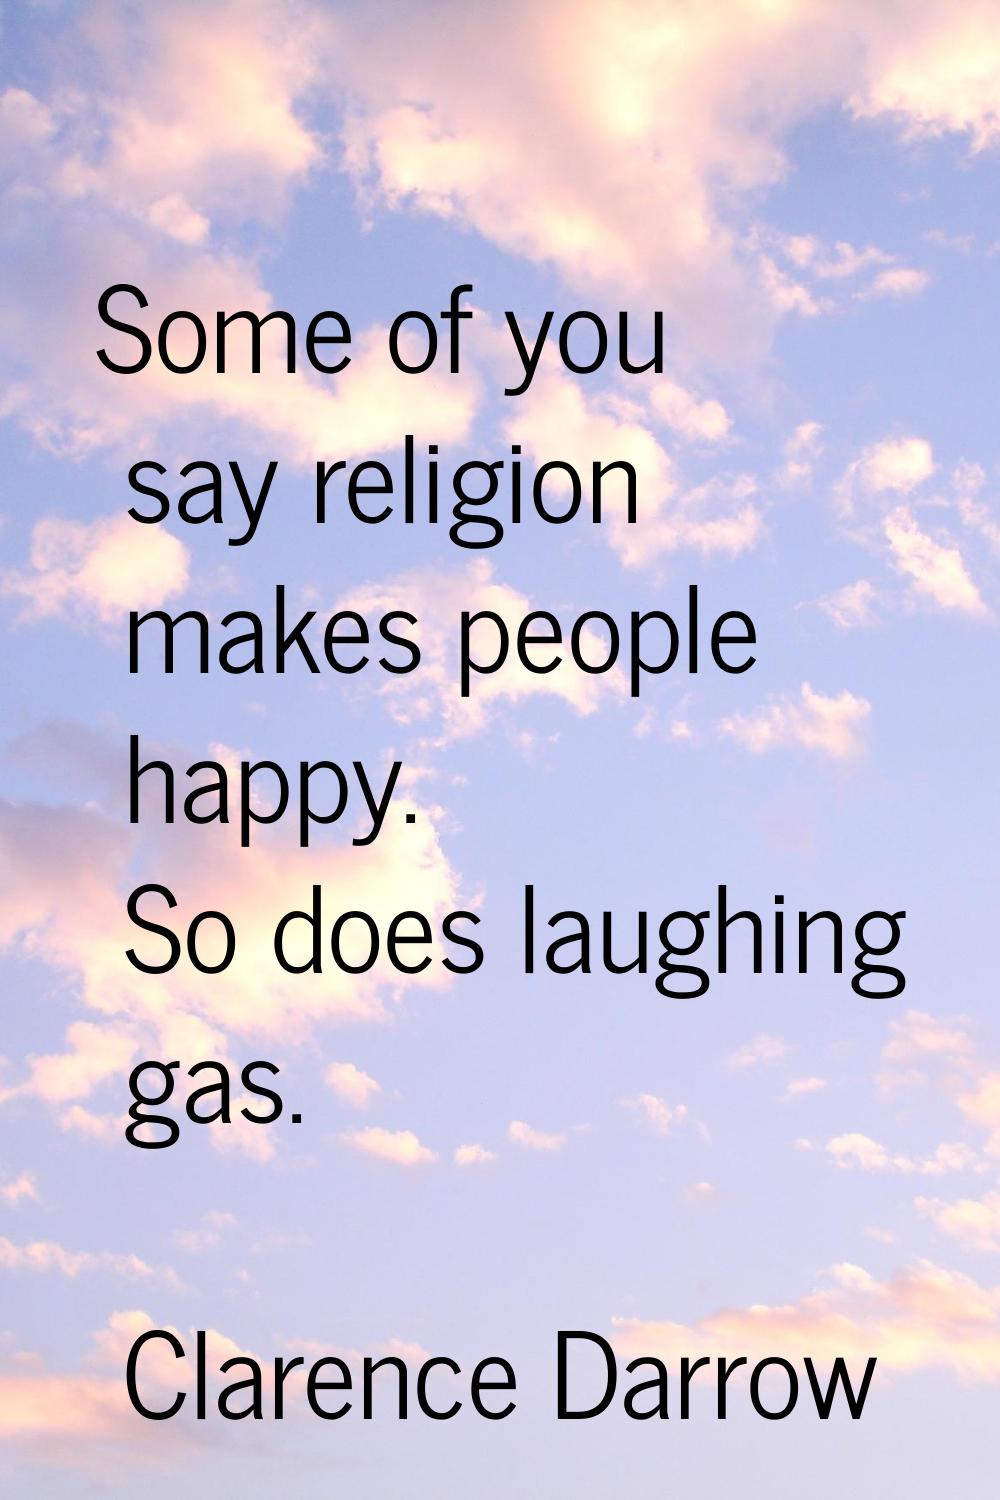 Some of you say religion makes people happy. So does laughing gas.